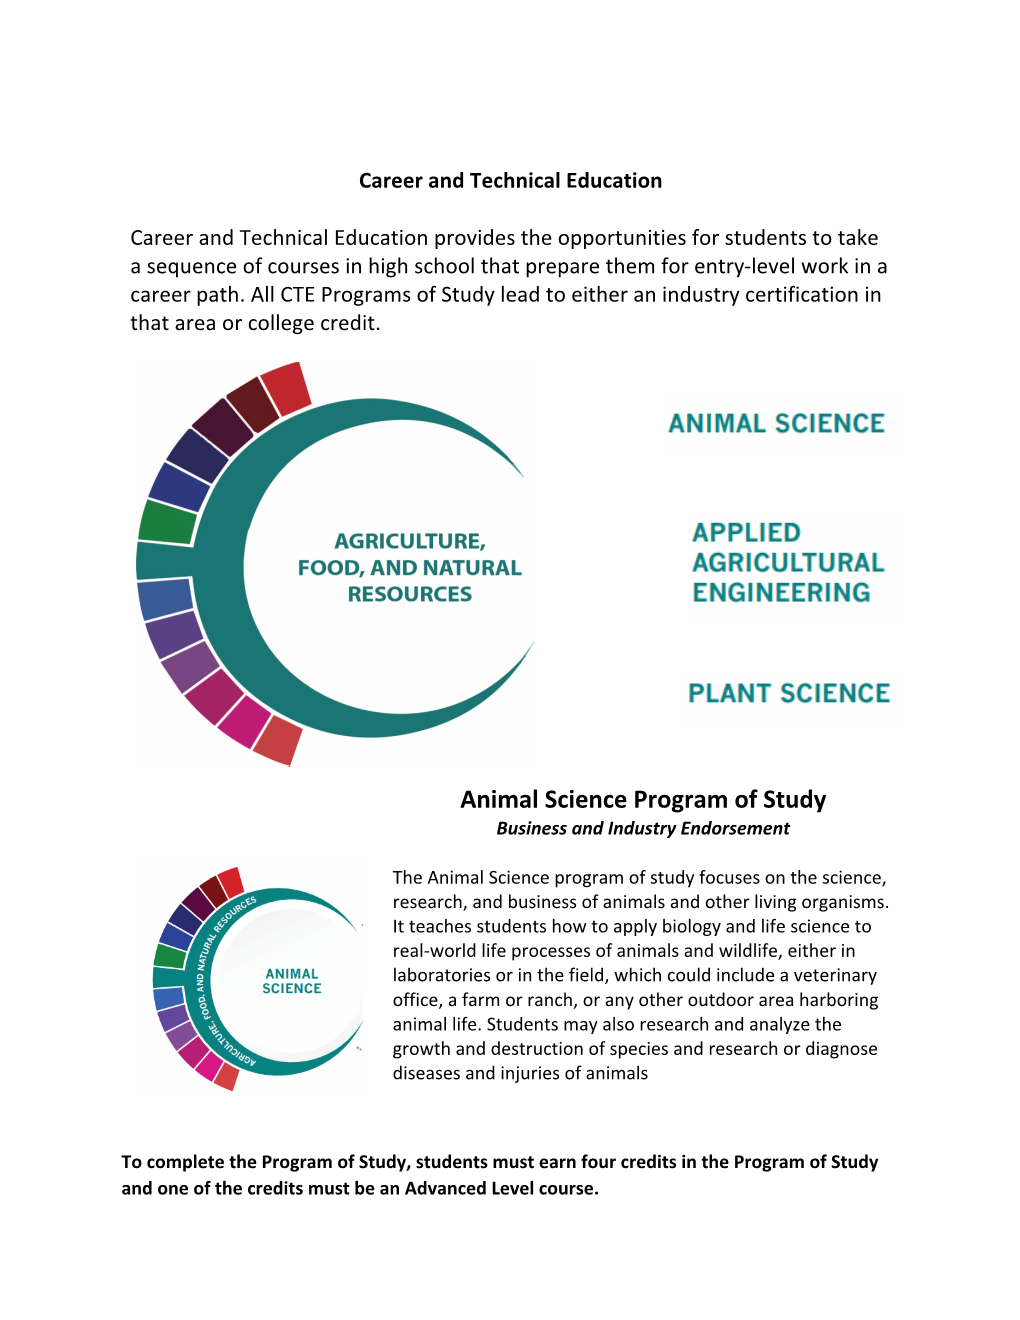 Animal Science Program of Study Business and Industry Endorsement